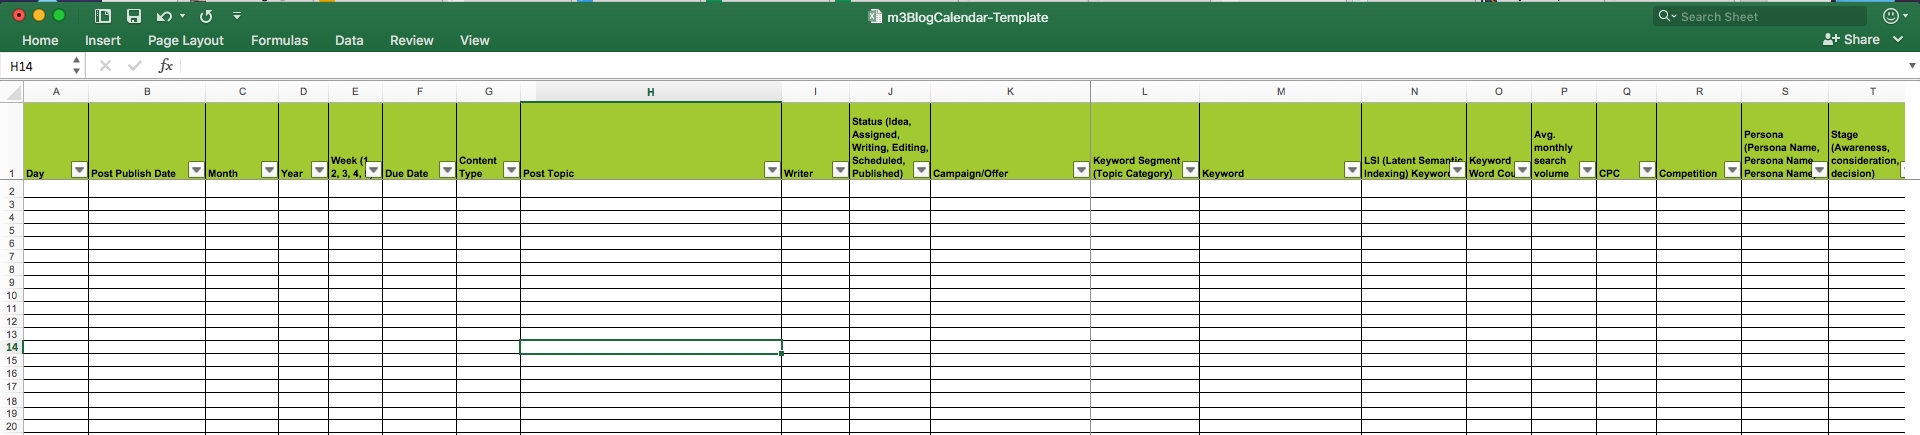 Editorial Calendar Templates For Content Marketing: The Ultimate List Monthly Calendar Spreadsheet Template